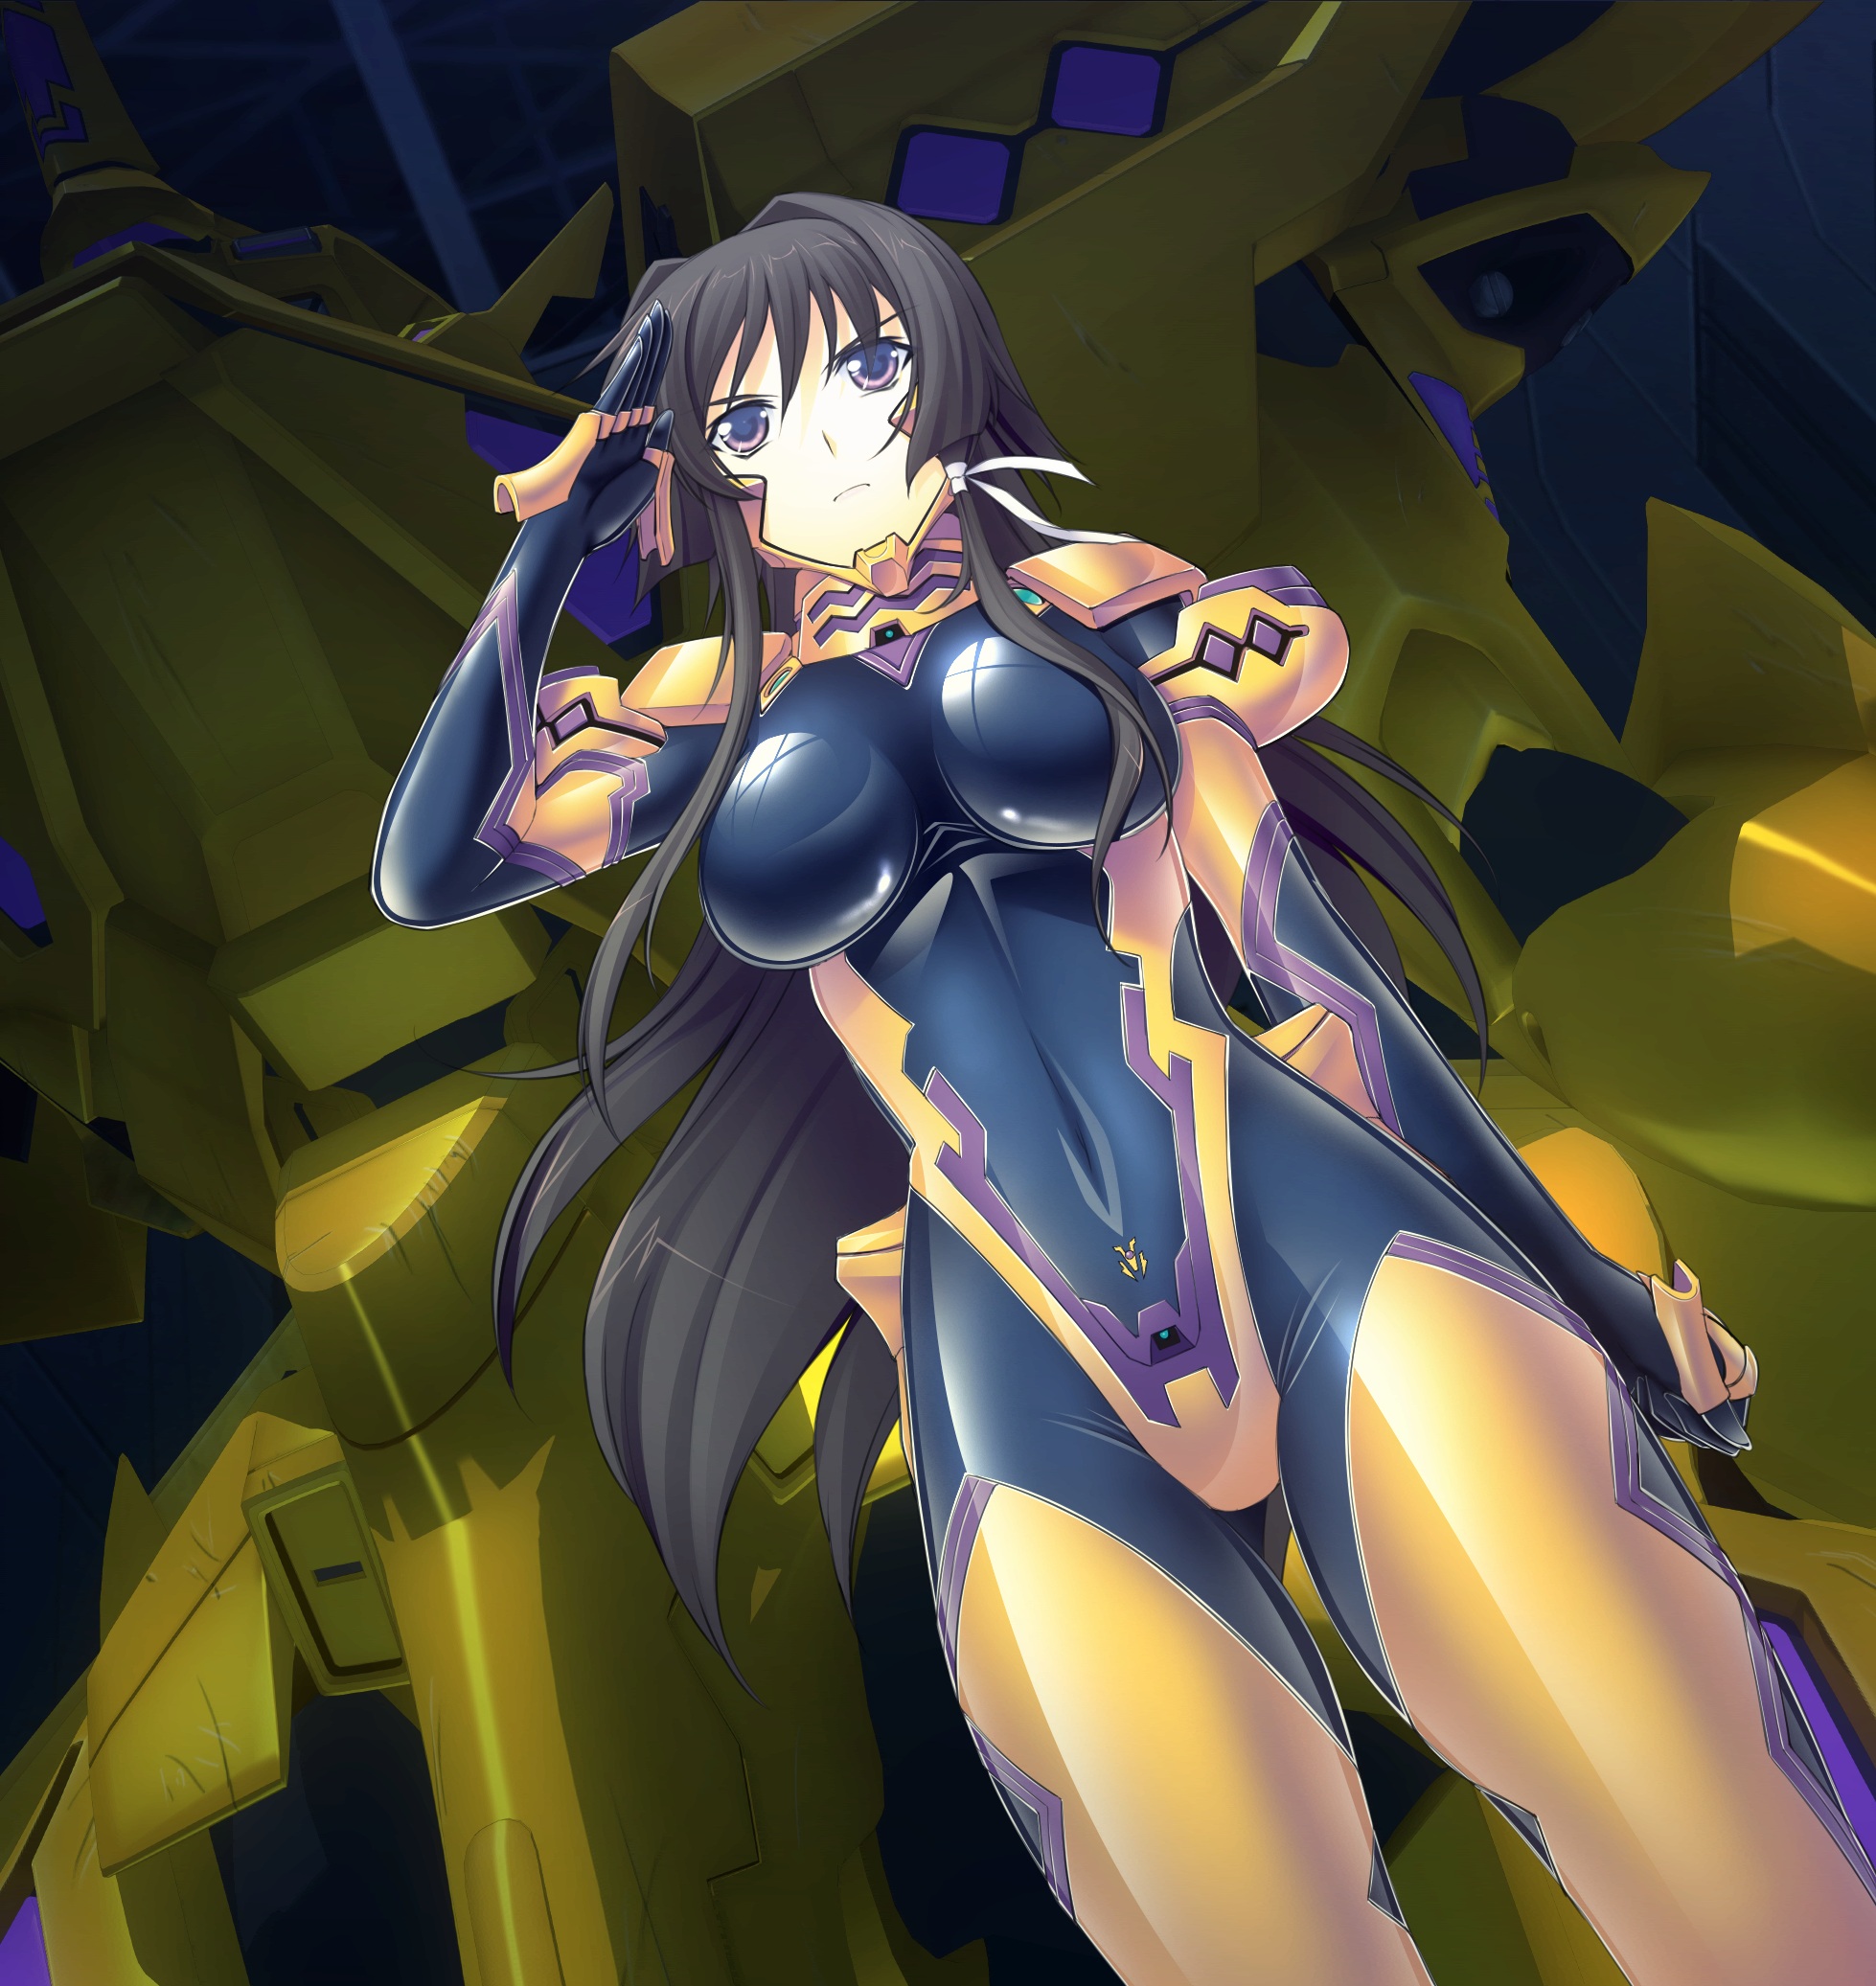 http://vignette2.wikia.nocookie.net/muvluv/images/9/95/Yui_saluting.jpg/revision/latest?cb=20140130042709